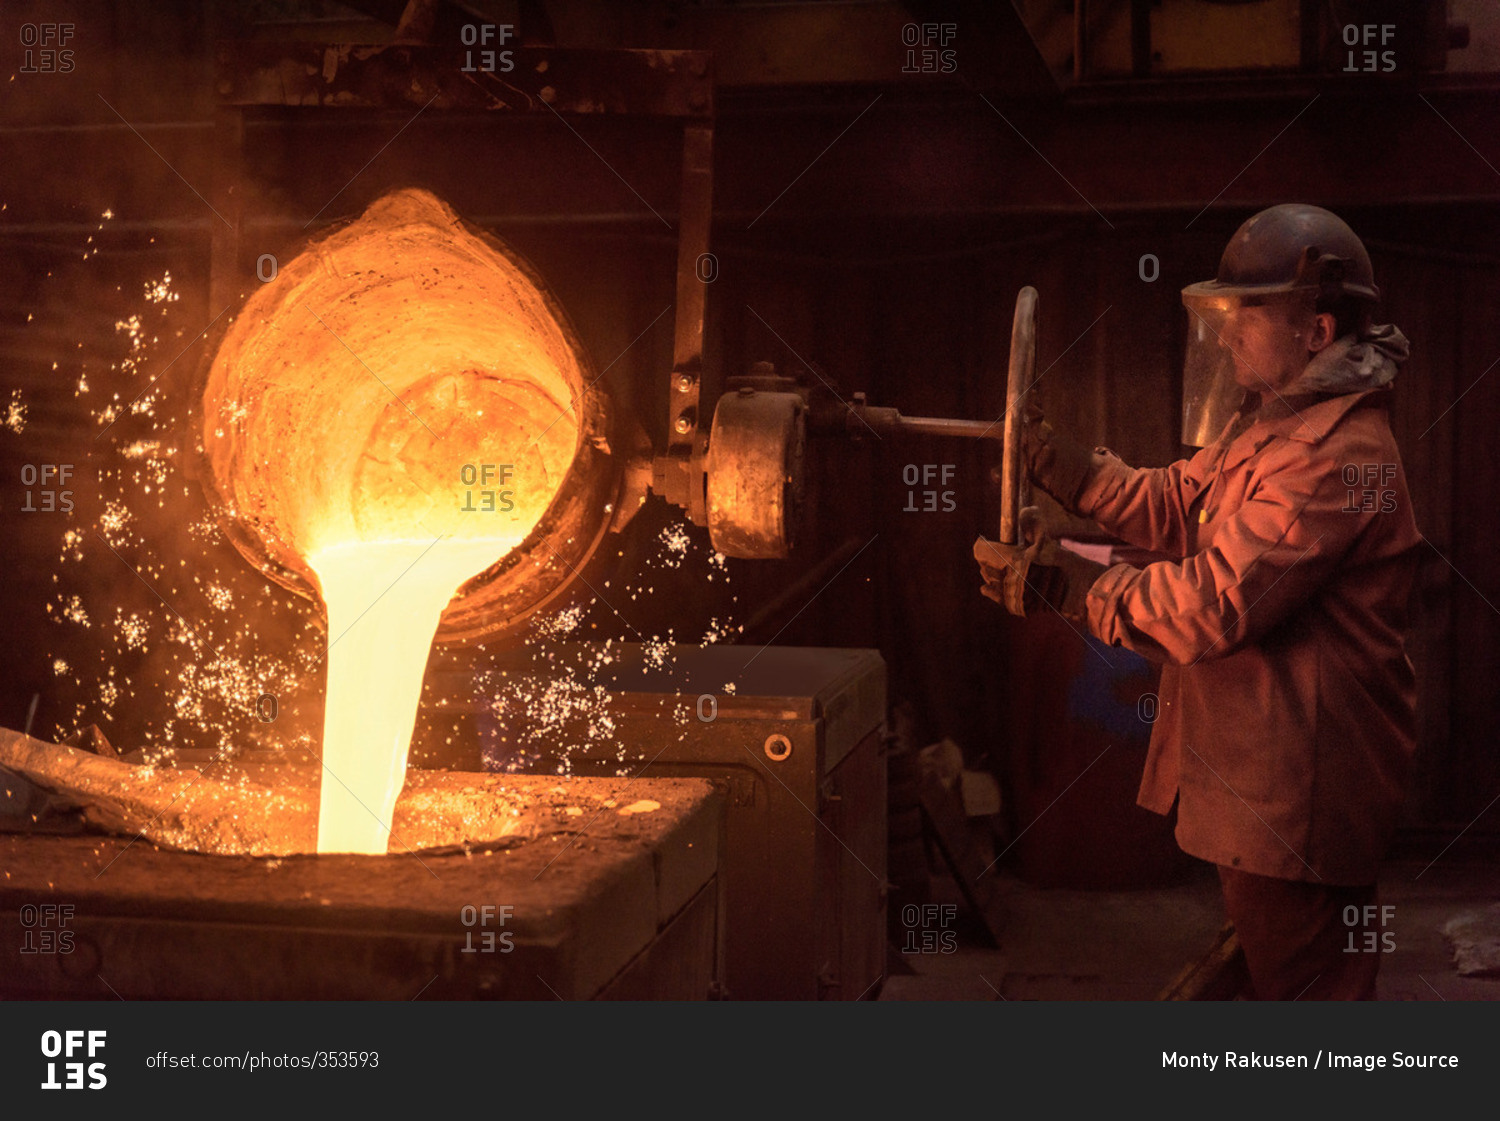 Worker pouring molten metal from flask in foundry workshop